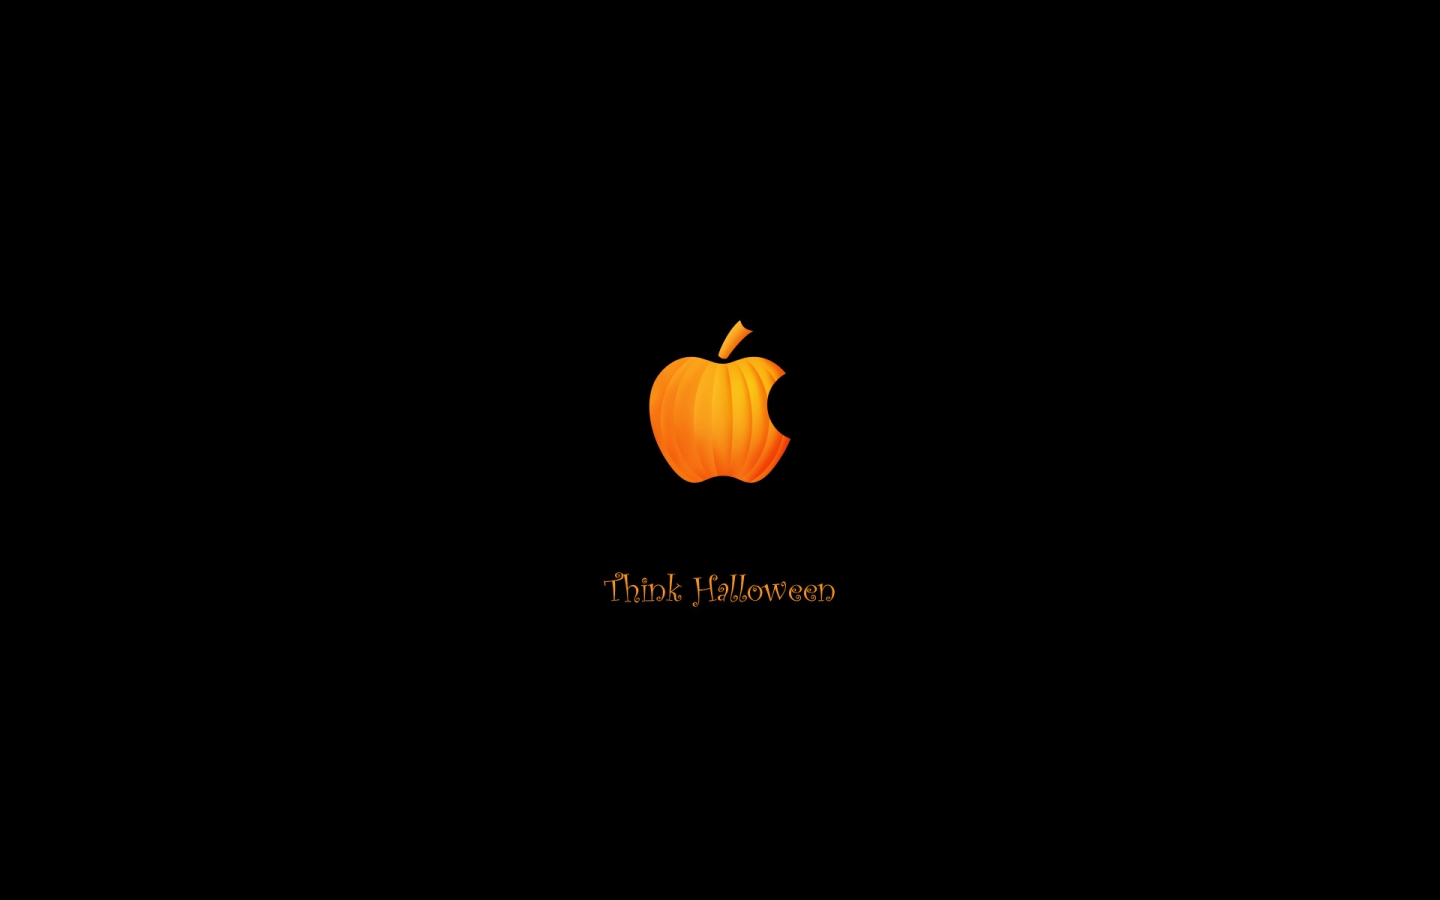 Think Halloween for 1440 x 900 widescreen resolution